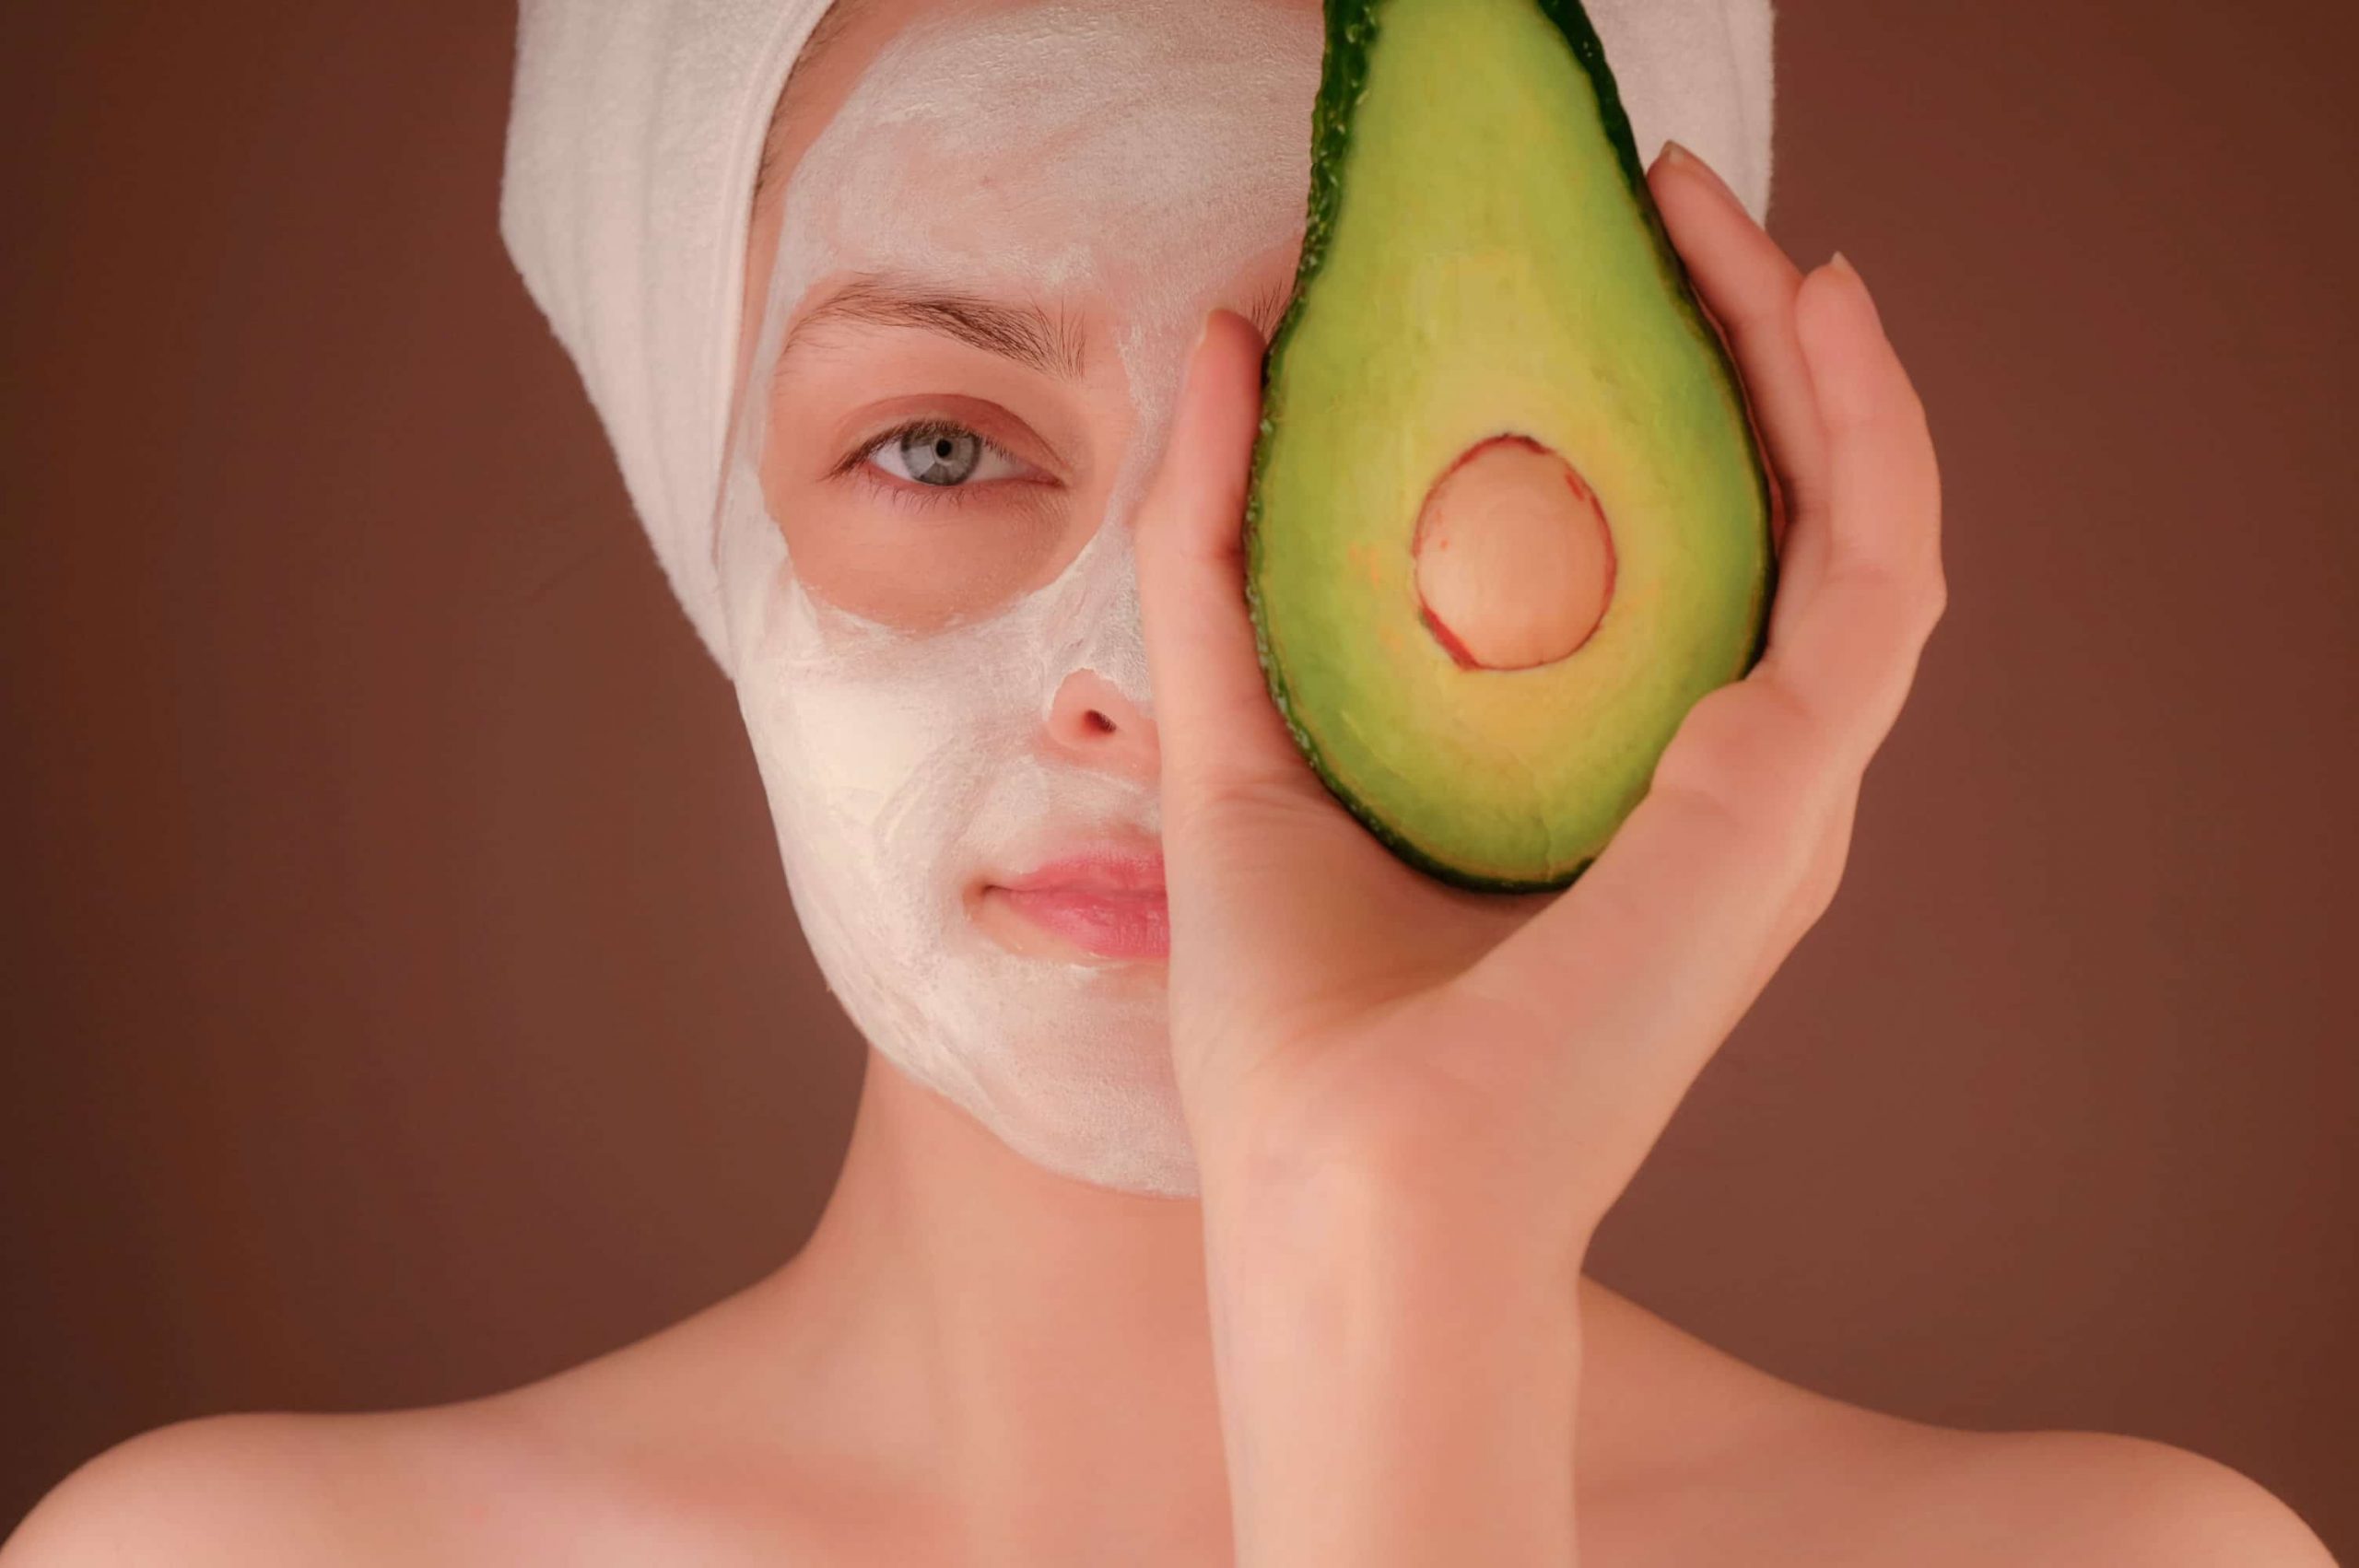 Achieving Natural Beauty Without Makeup – 10 Simple Tips